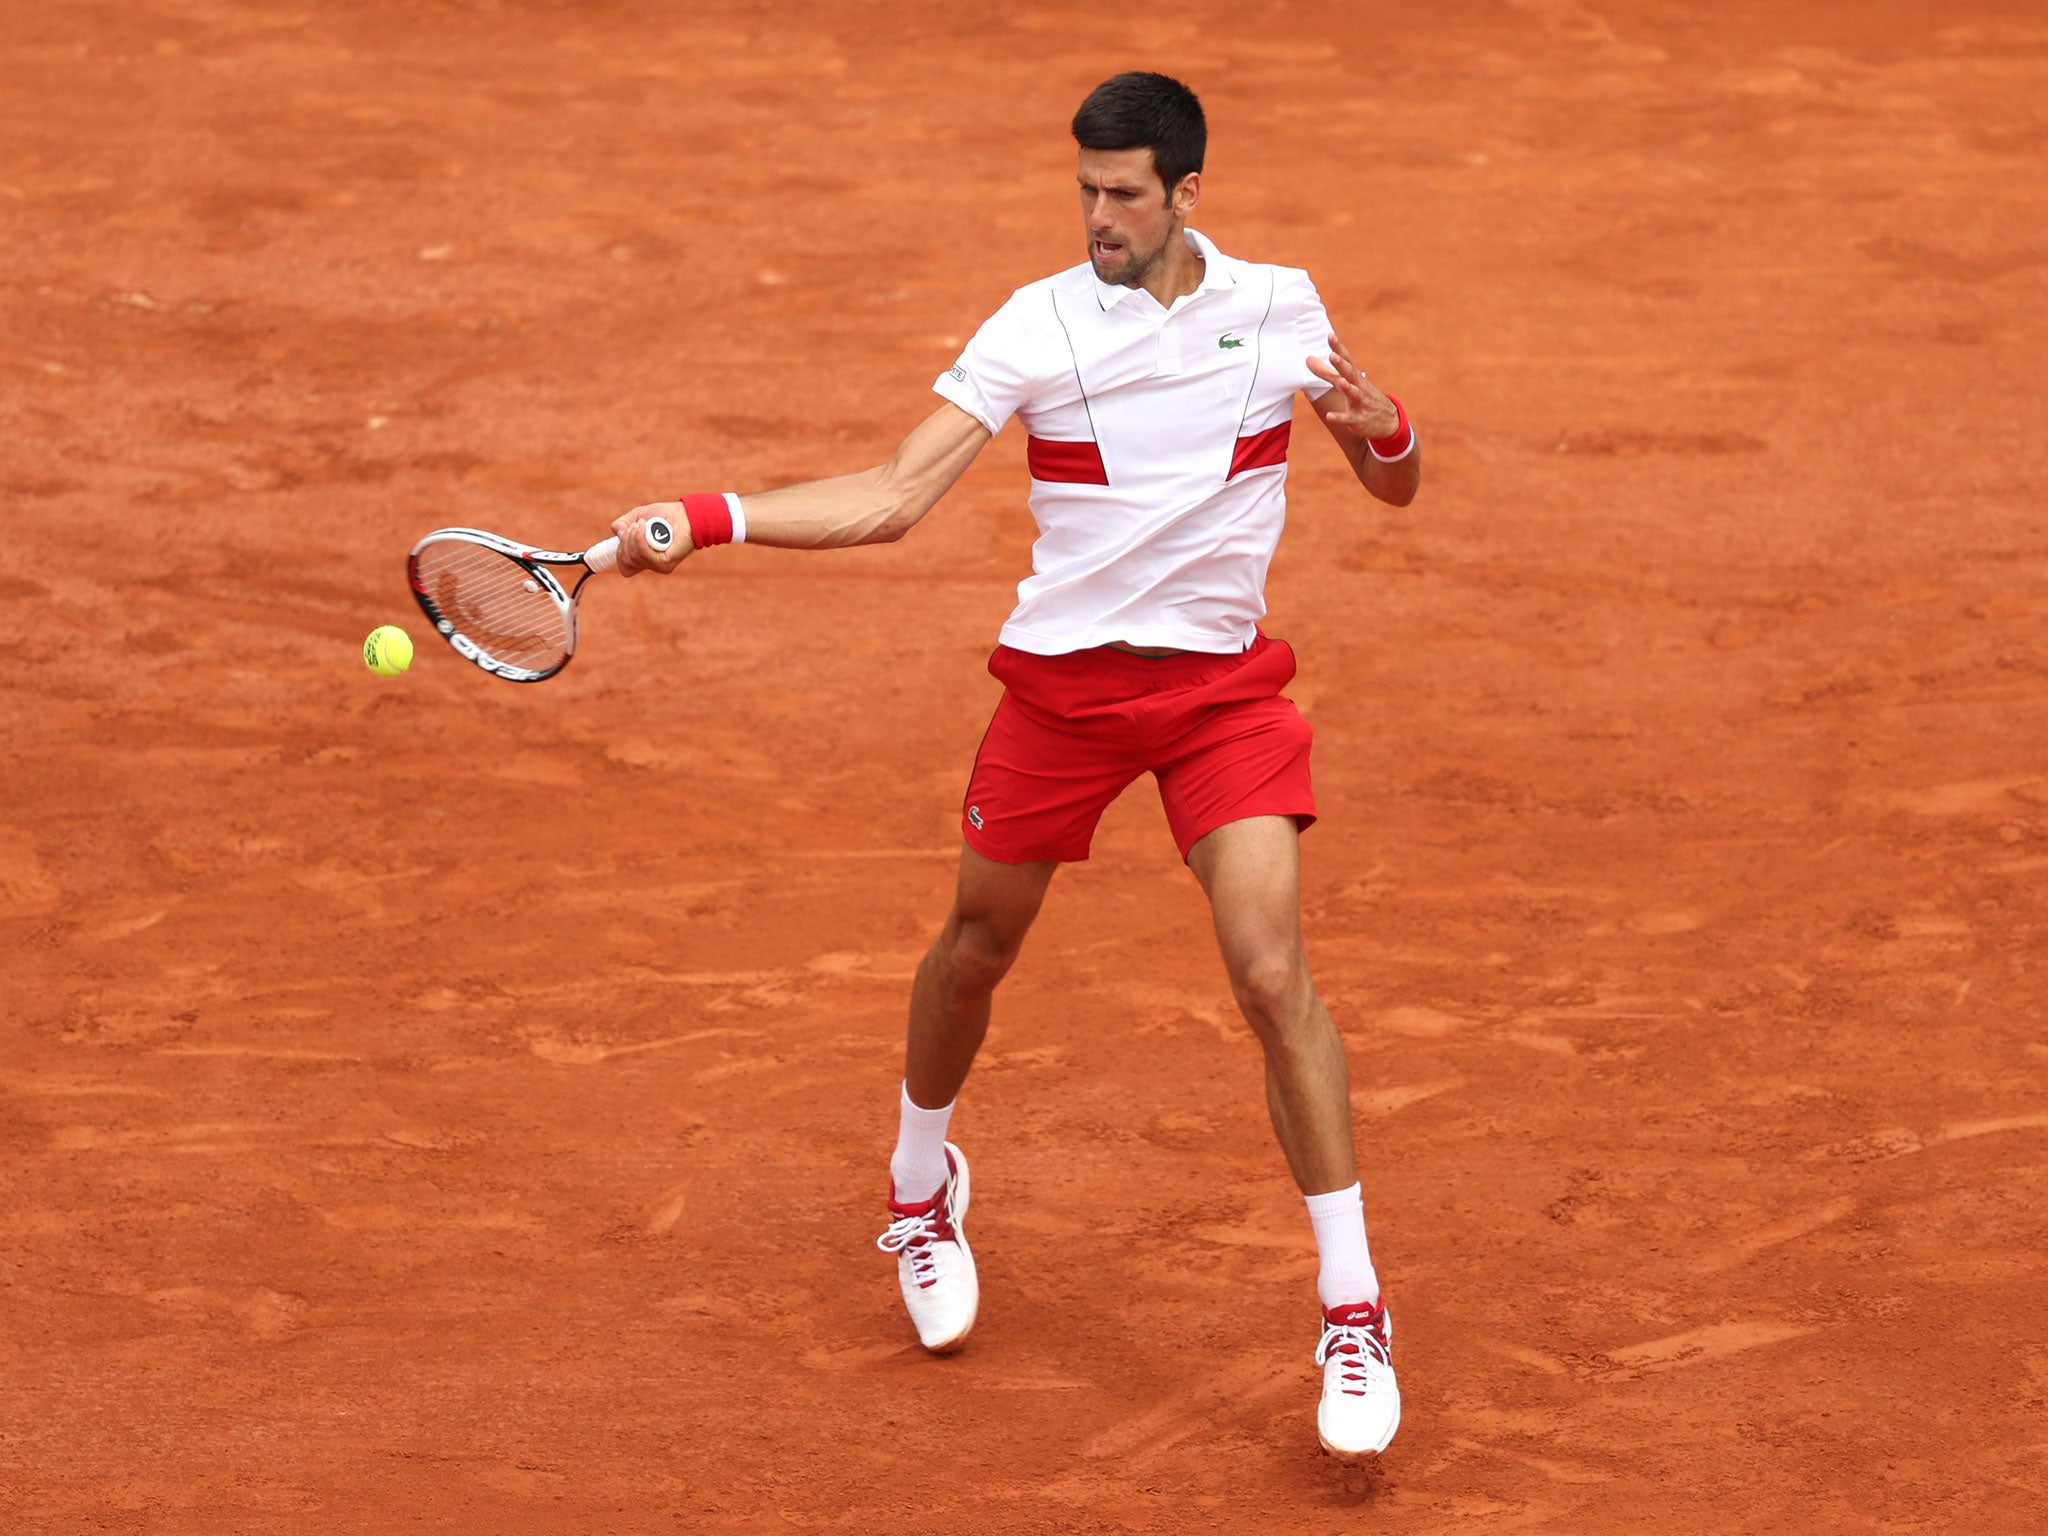 Novak Djokovic in action during the French Open